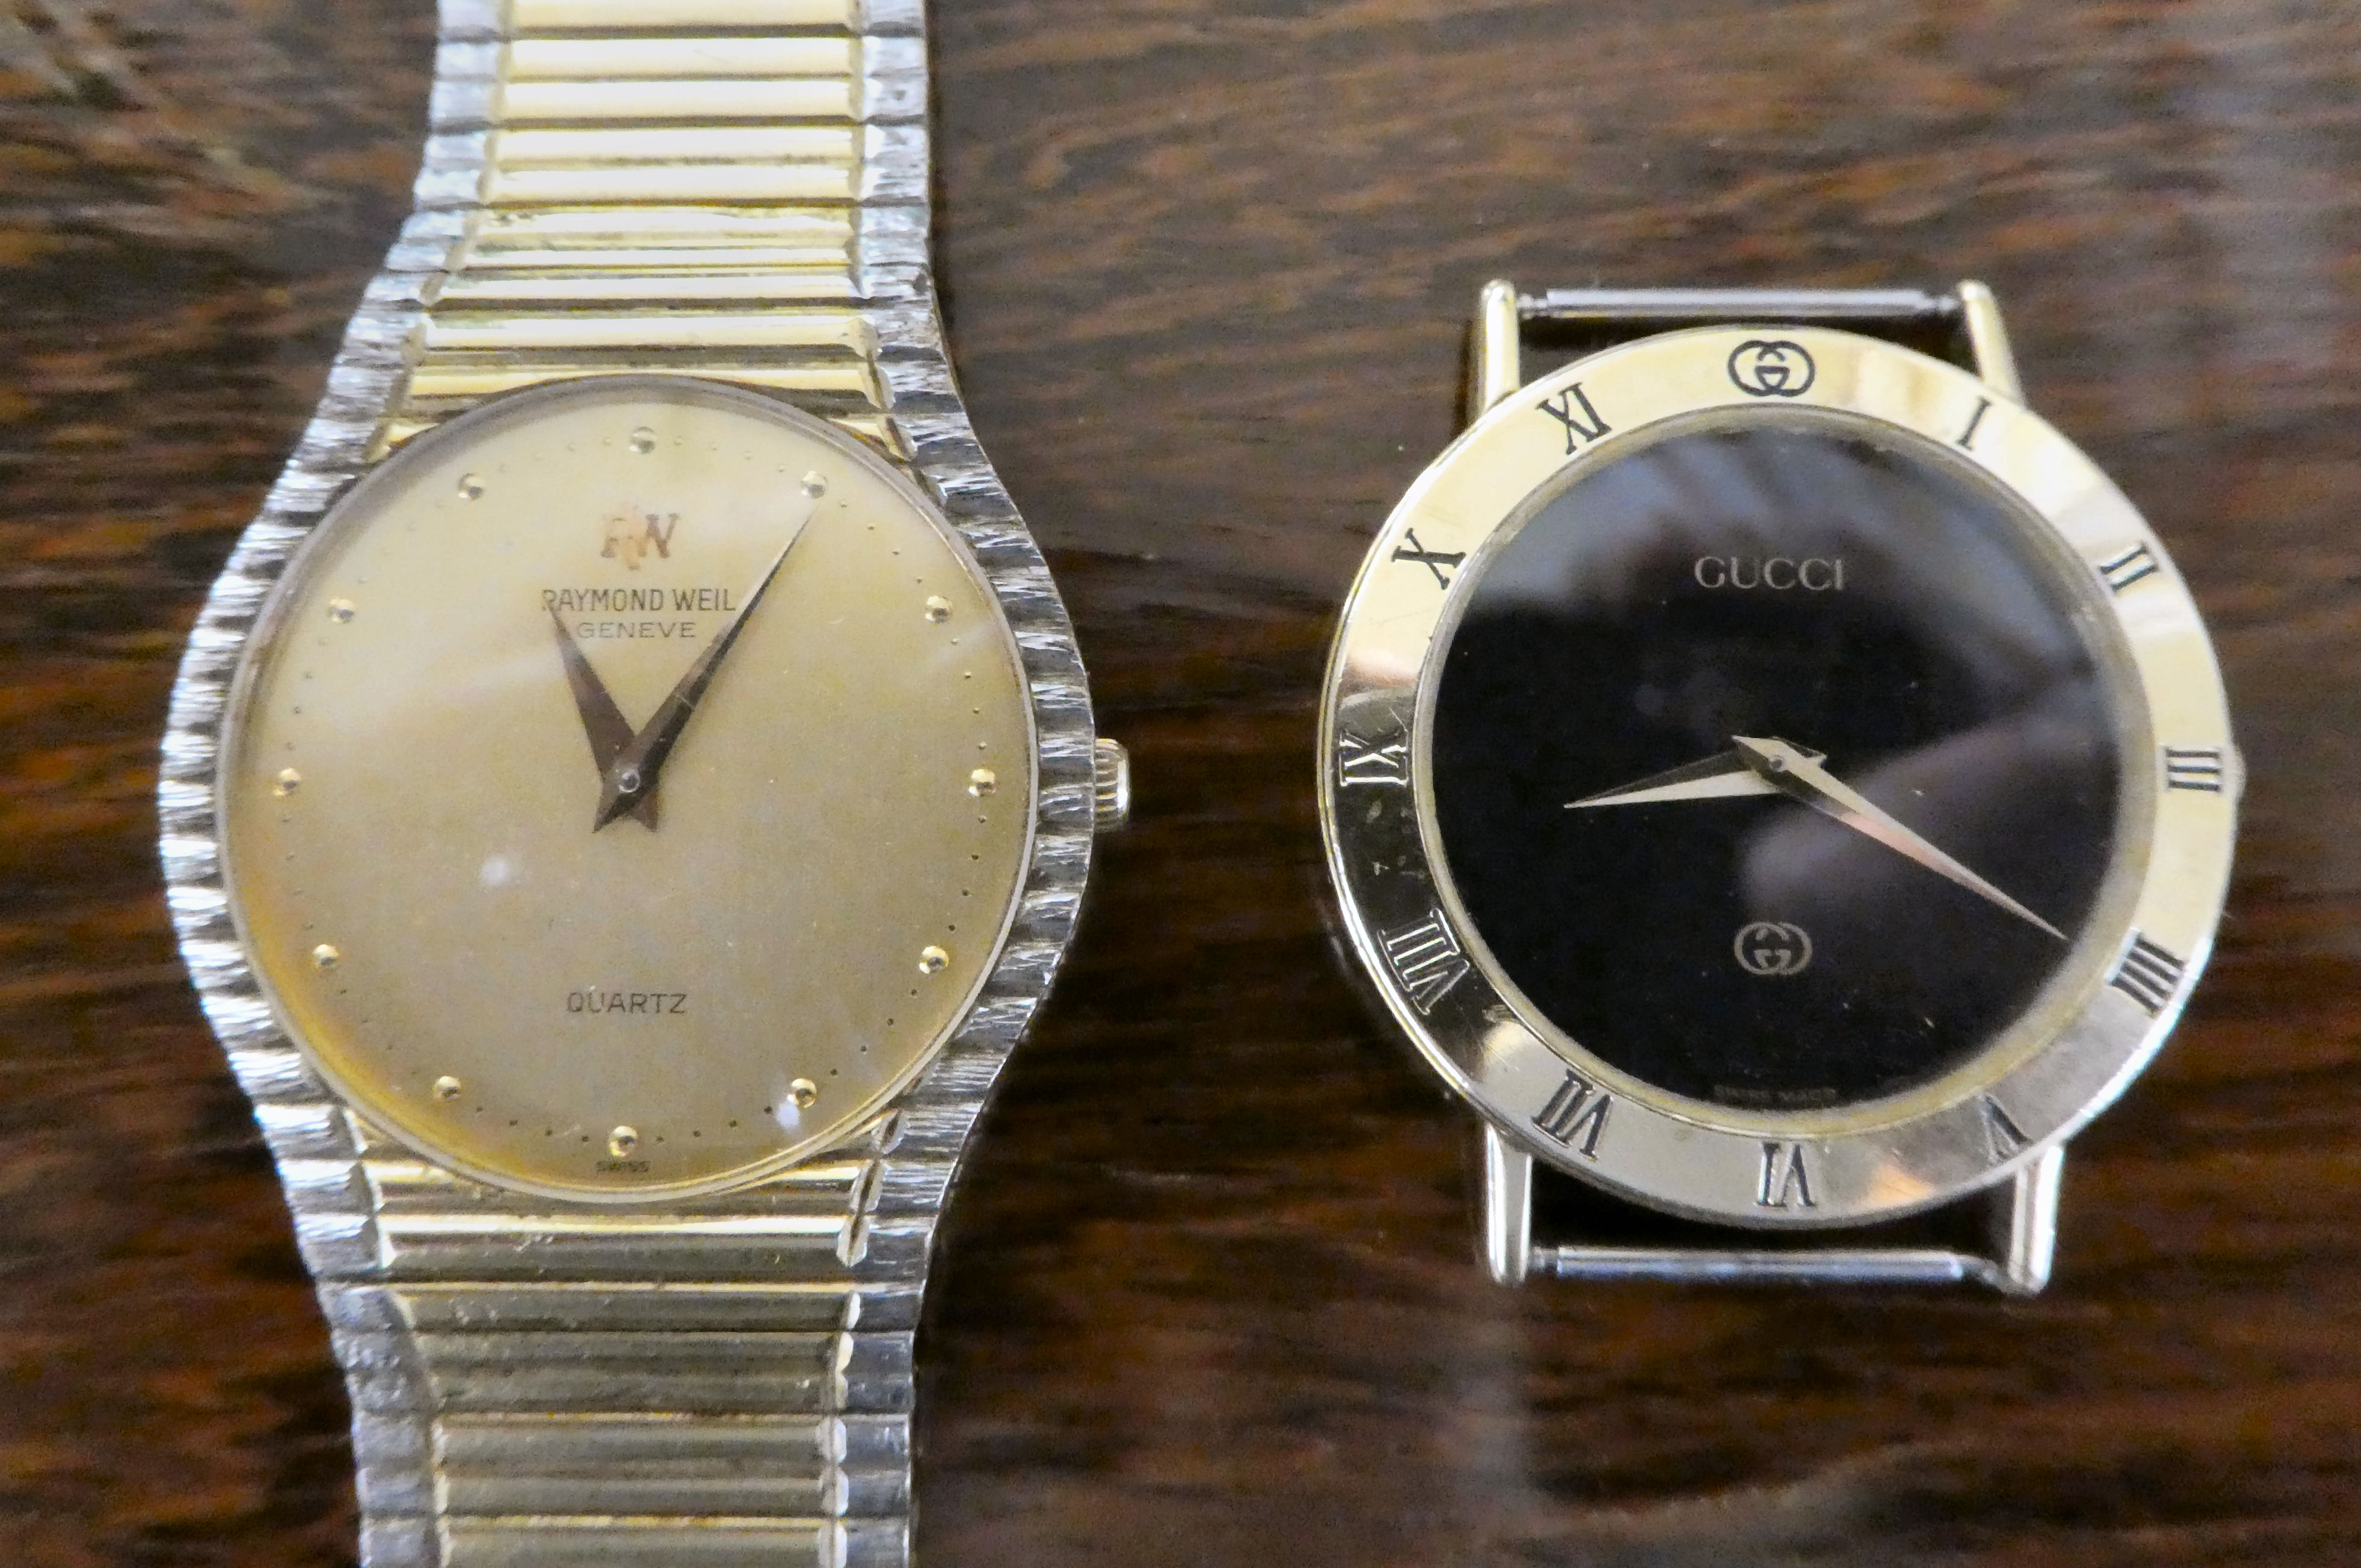 Watches: to include a Raymond Weil gold plated bracelet watch, faced by a baton dial